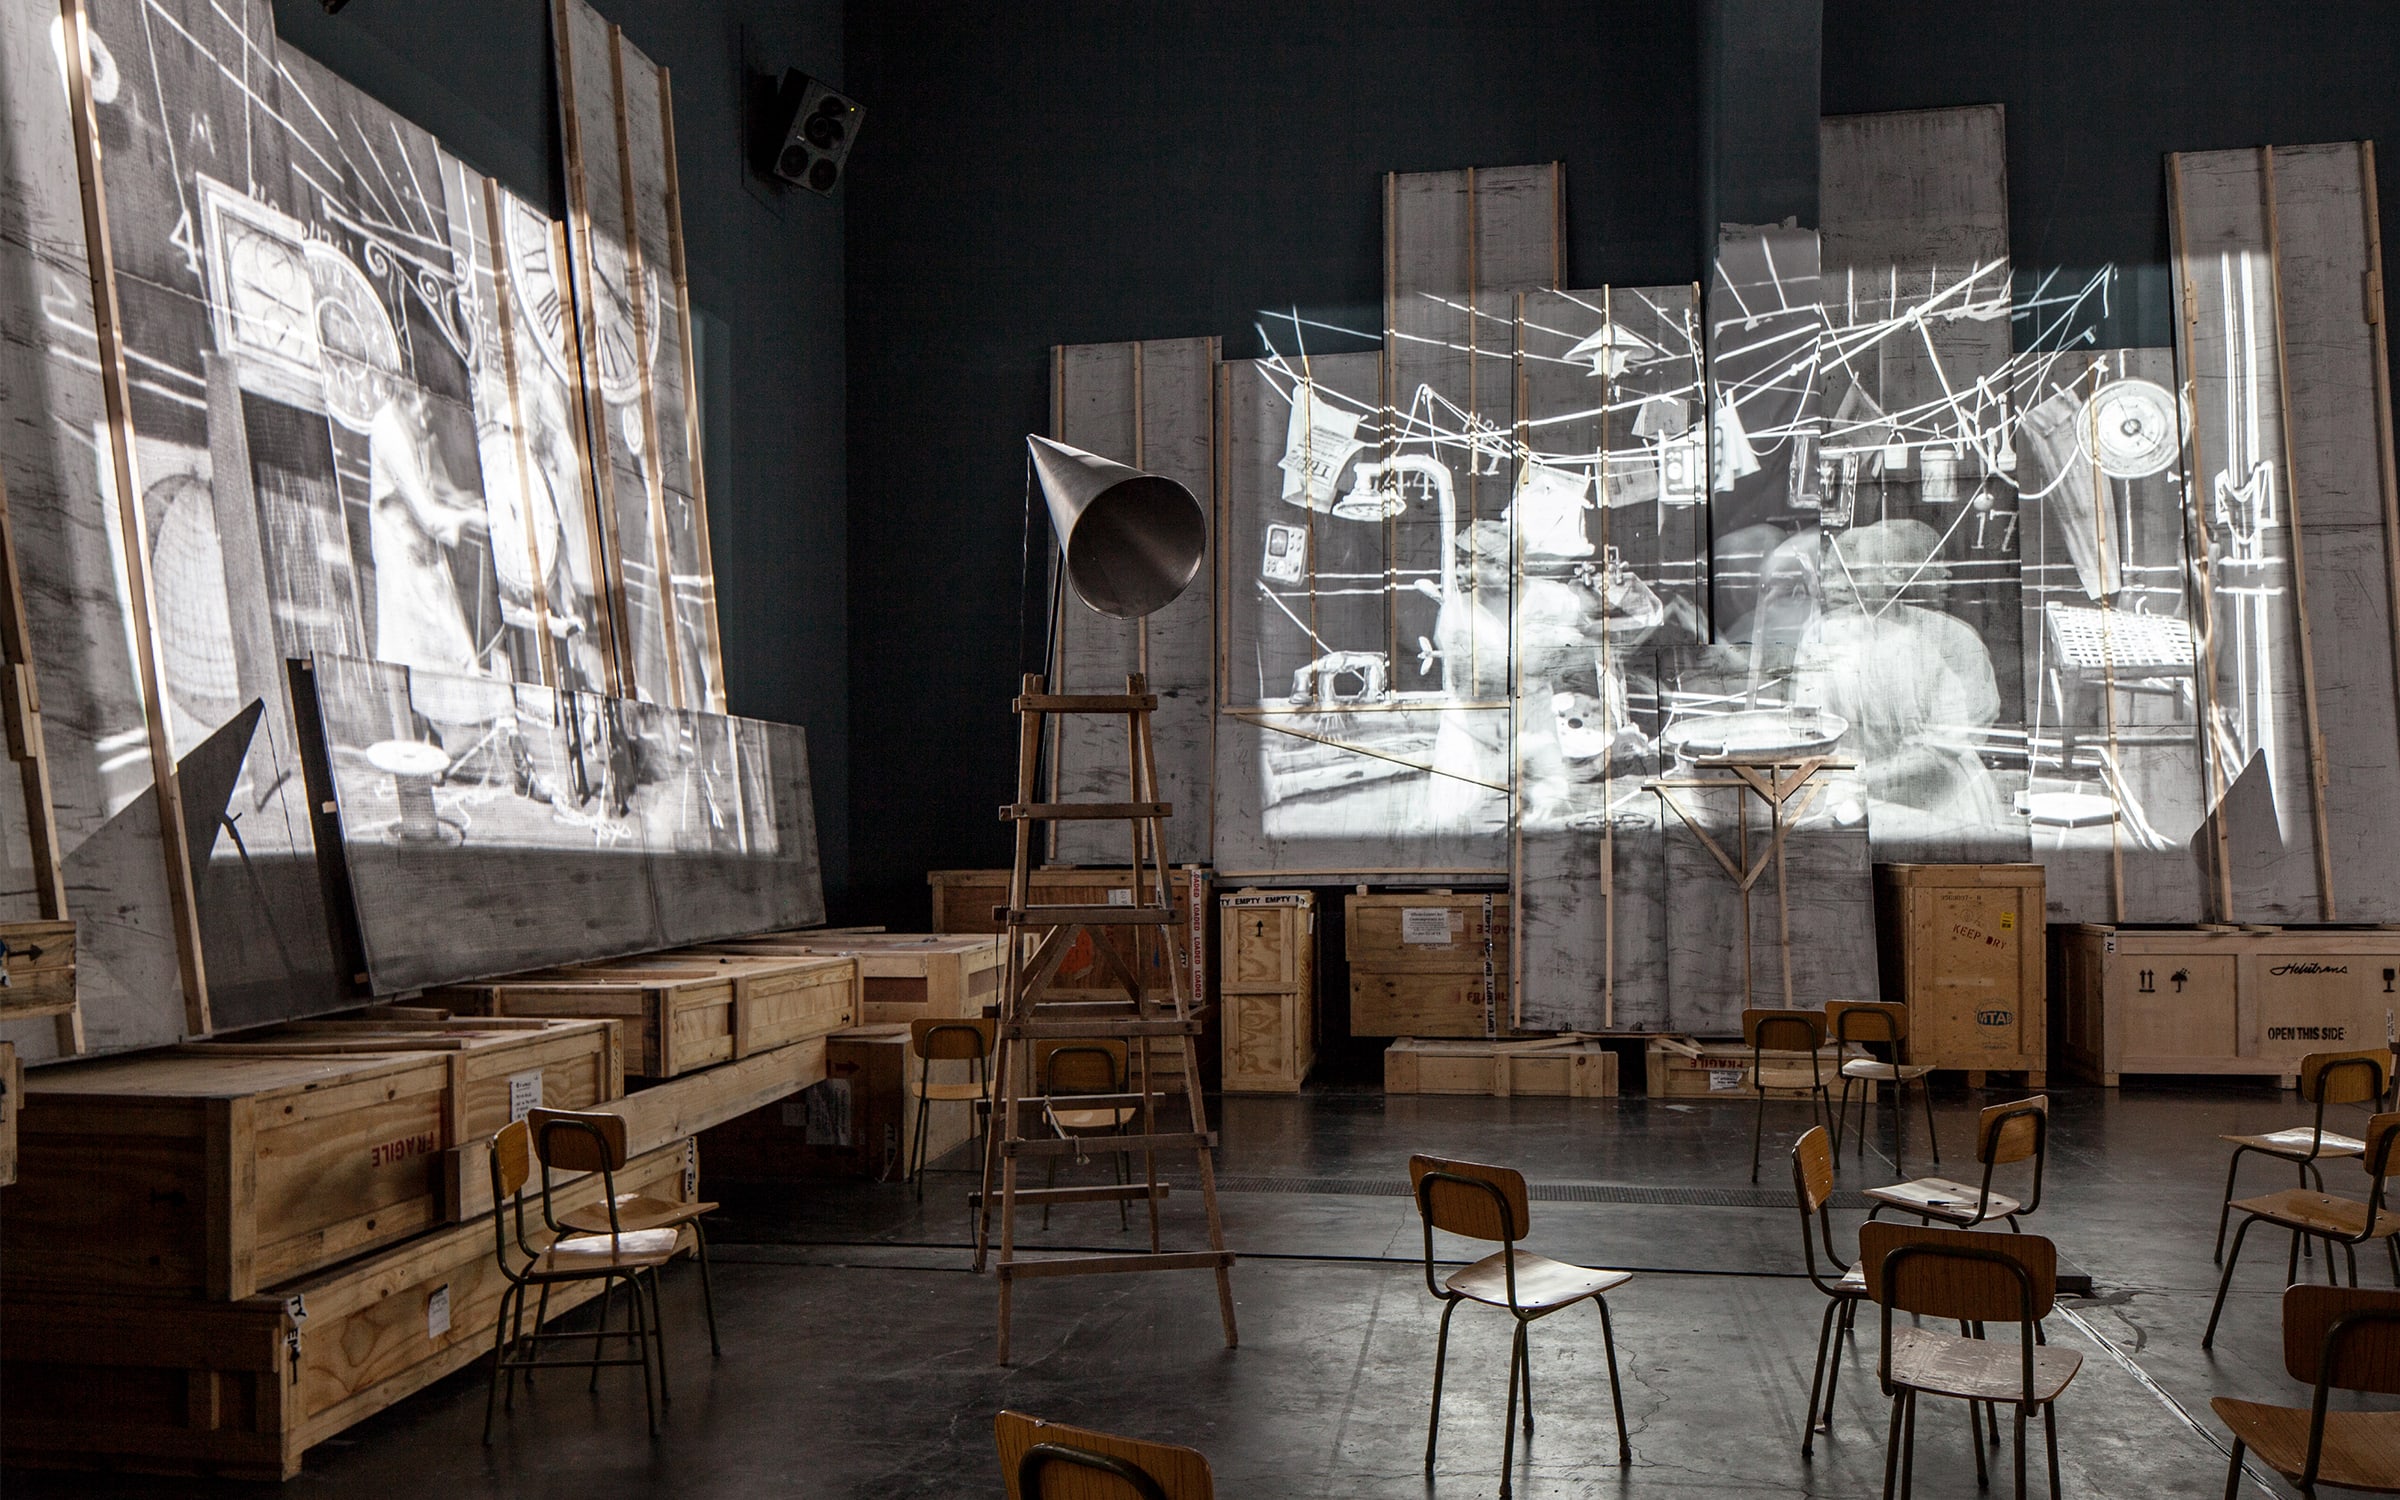 William Kentridge, The Refusal of Time, 2012, dimensions variable. Collection of Sifang Art Museum, Nanjing.